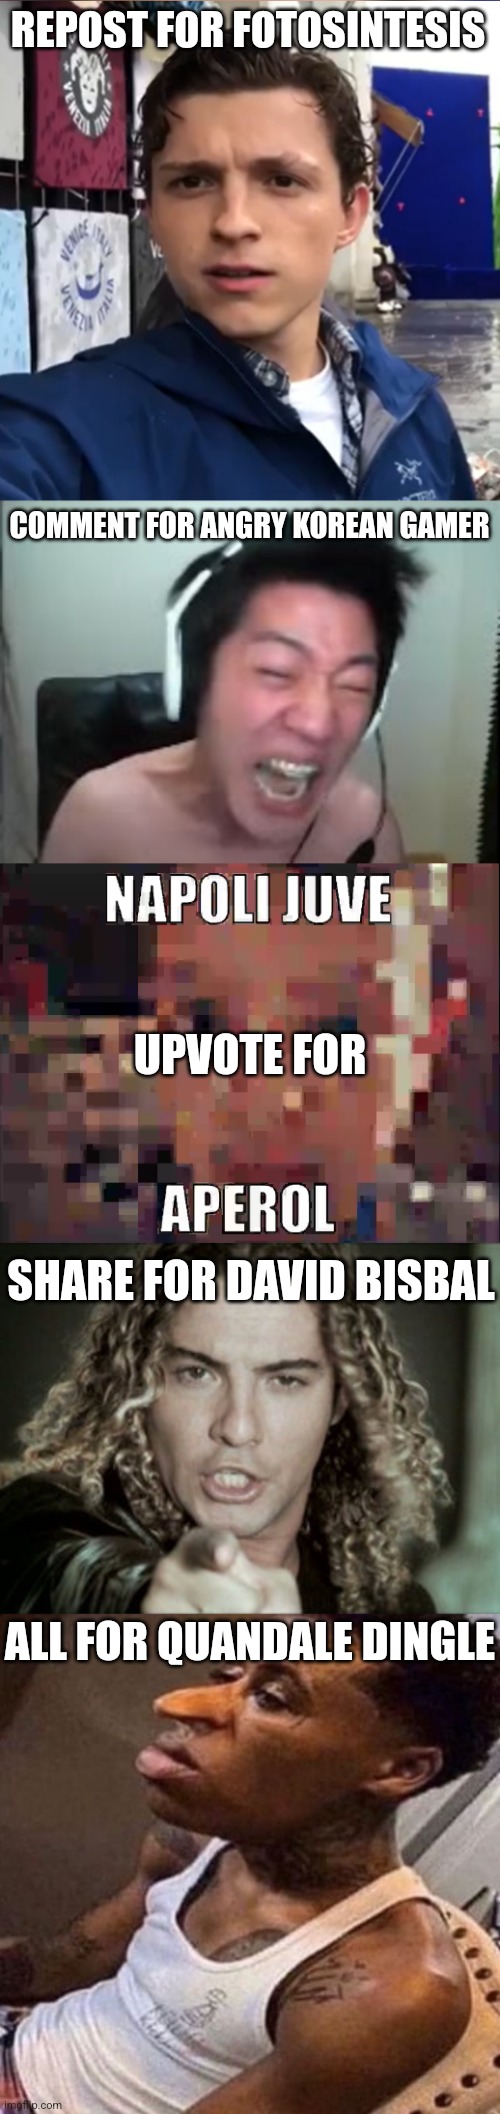 REPOST FOR FOTOSINTESIS; COMMENT FOR ANGRY KOREAN GAMER; UPVOTE FOR; SHARE FOR DAVID BISBAL; ALL FOR QUANDALE DINGLE | image tagged in tom holland fotosintesis,angry korean gamer rage,napoli juve aperol,david bisbal pointing at you,quandale dingle | made w/ Imgflip meme maker